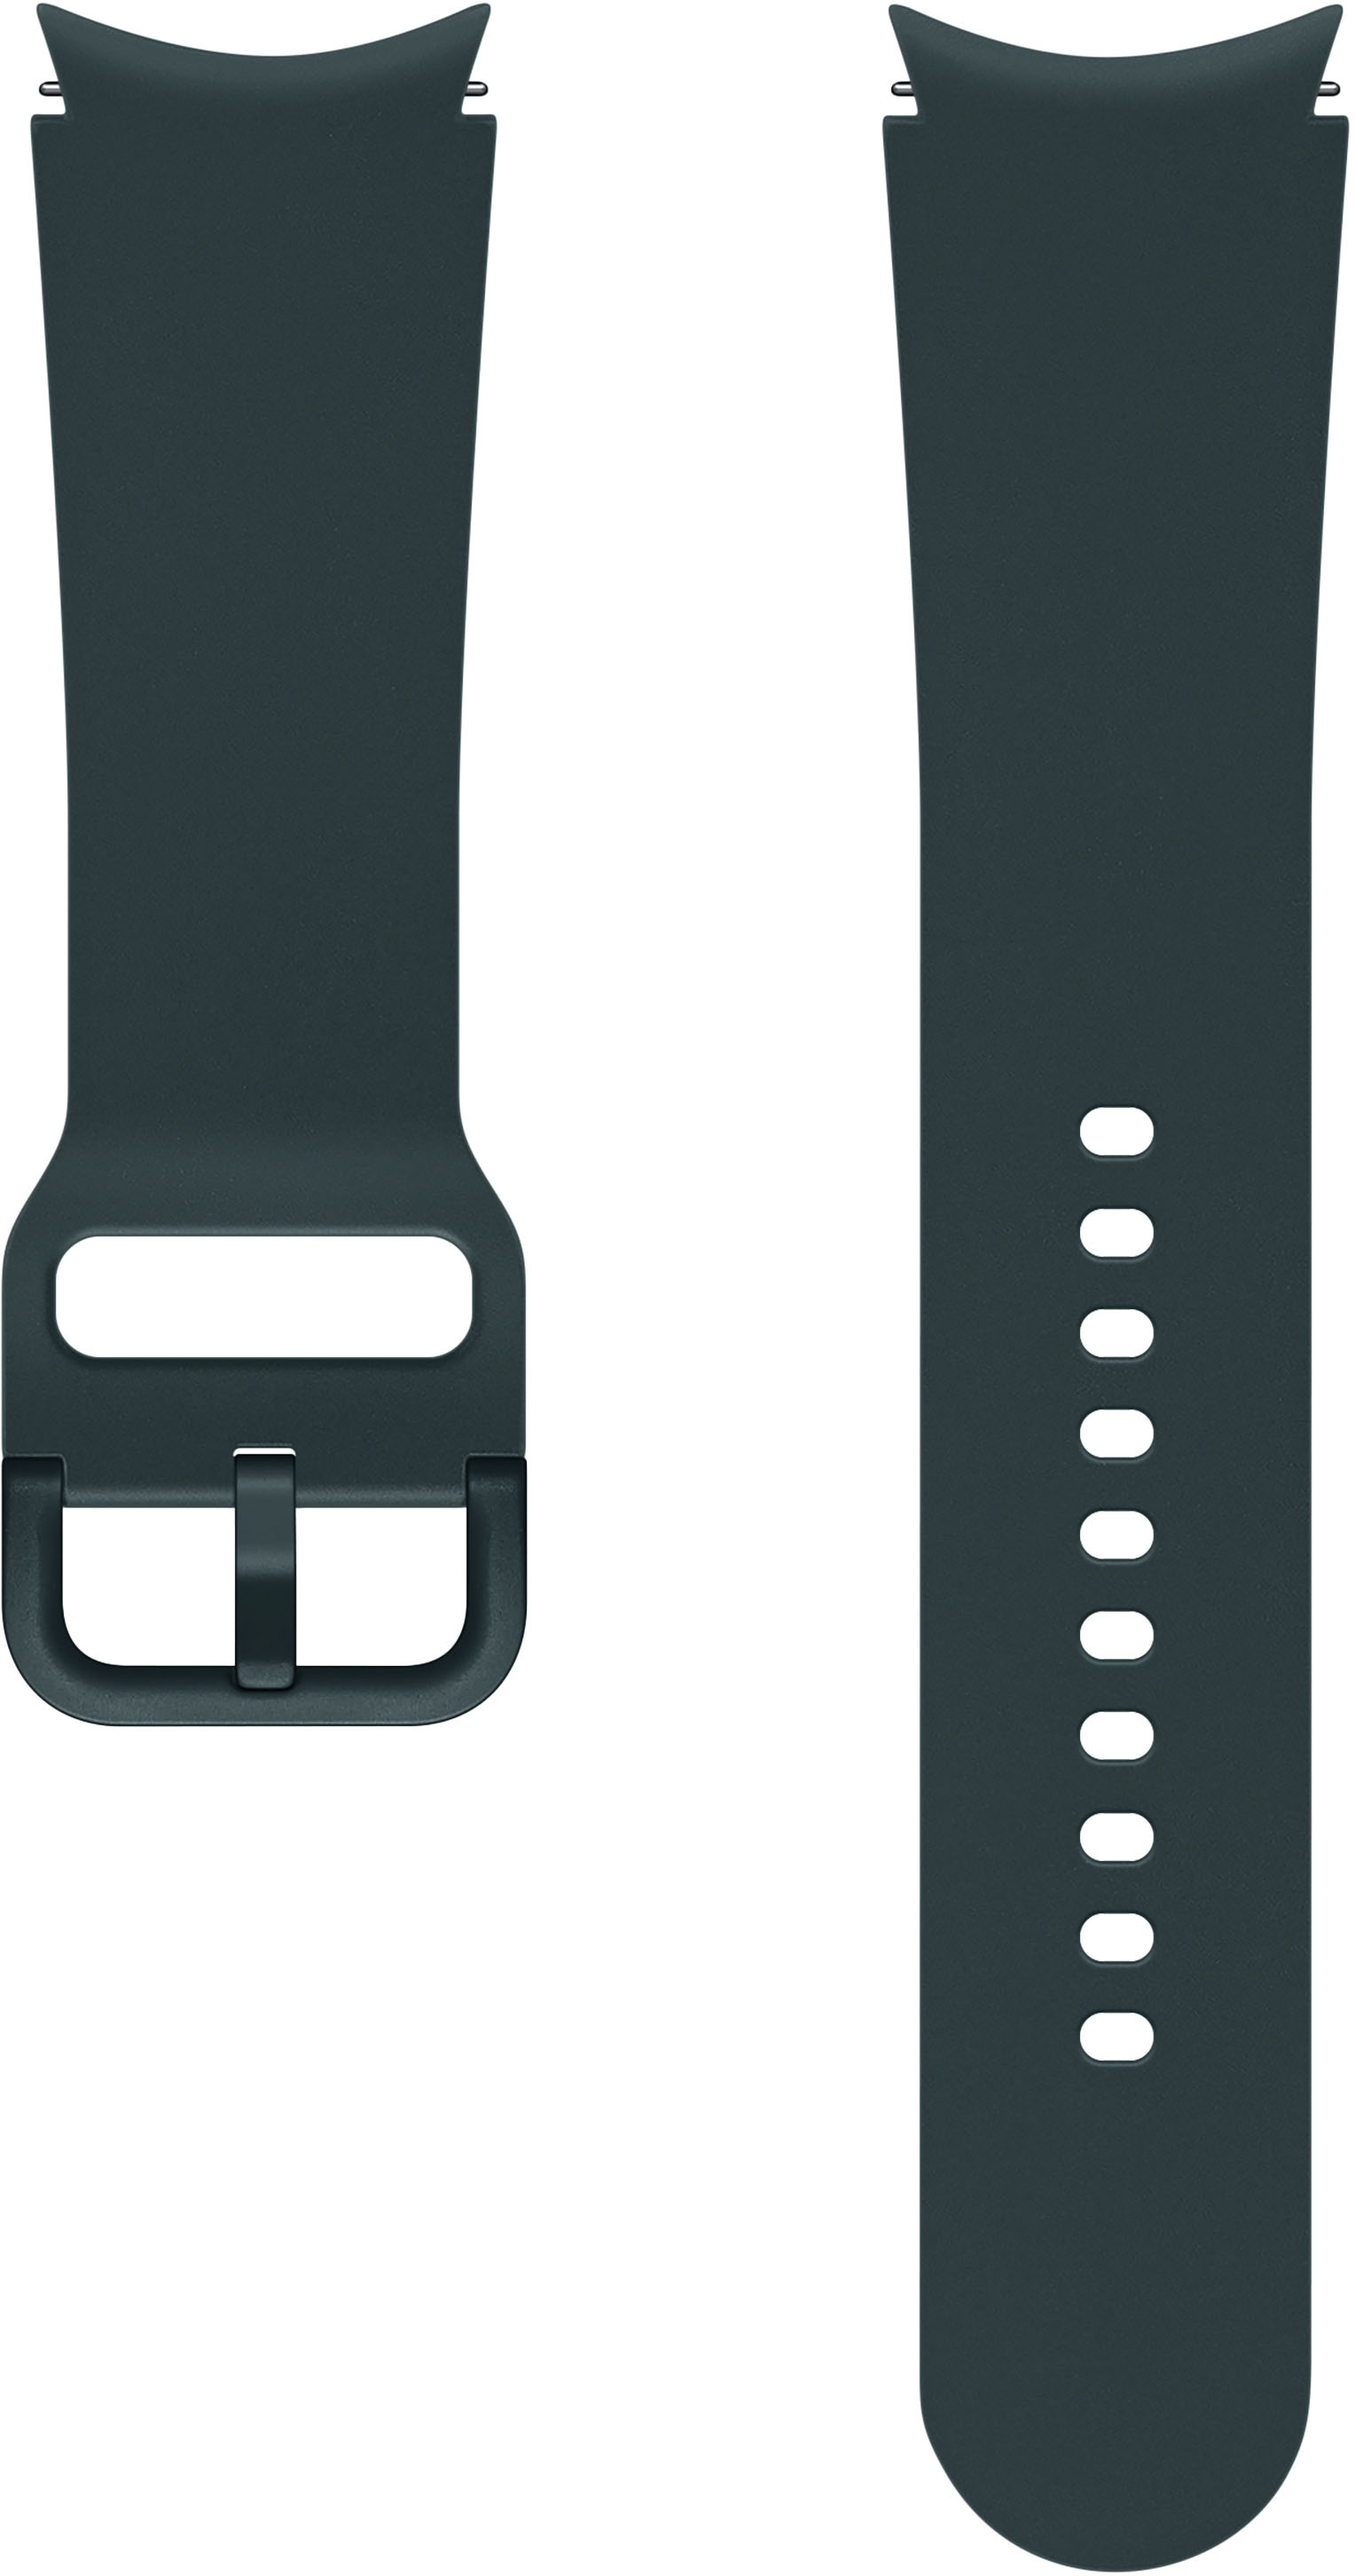 gettechgo Metal Band for Galaxy 5 / 4 44mm 40mm / Galaxy 5 Pro 45mm / 4  Classic 46mm 42mm Smart Watch Strap Price in India - Buy gettechgo Metal Band  for Galaxy 5 / 4 44mm 40mm / Galaxy 5 Pro 45mm / 4 Classic 46mm 42mm Smart Watch  Strap